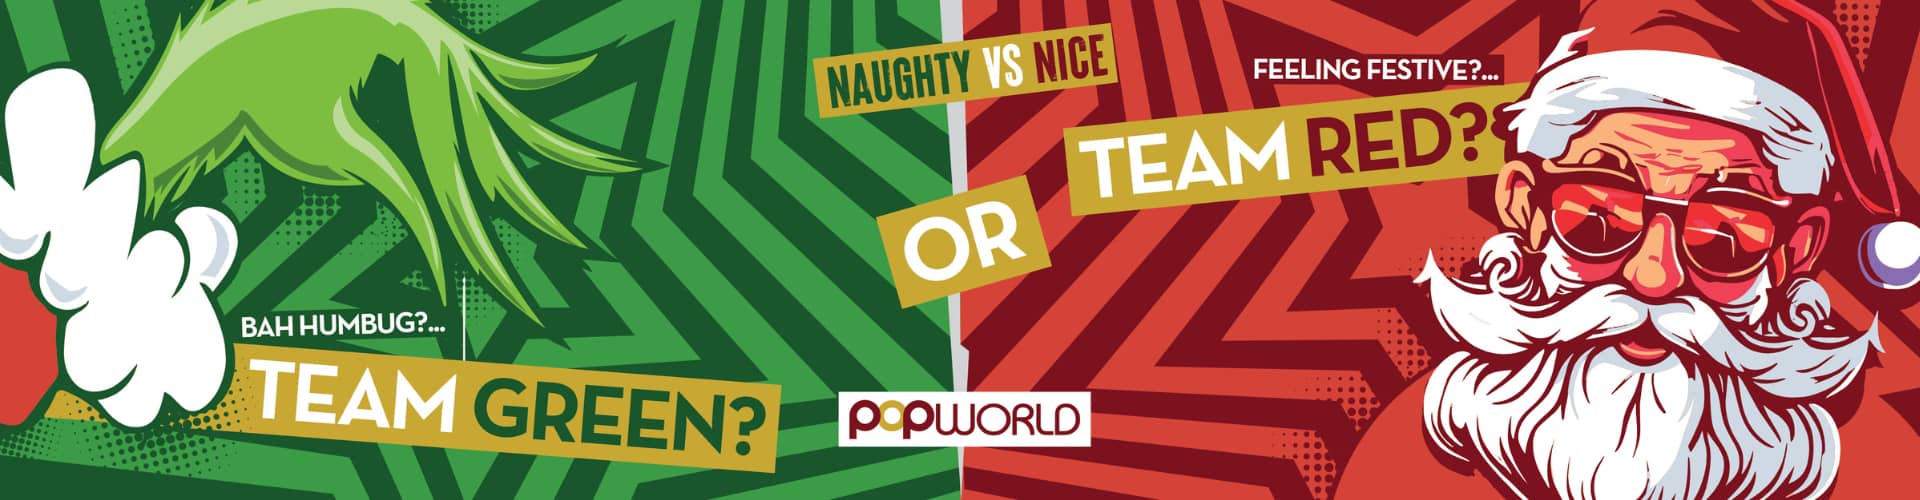 Popworld Manchester - Naughty vs Nice - Are you Team Green or Team Red?